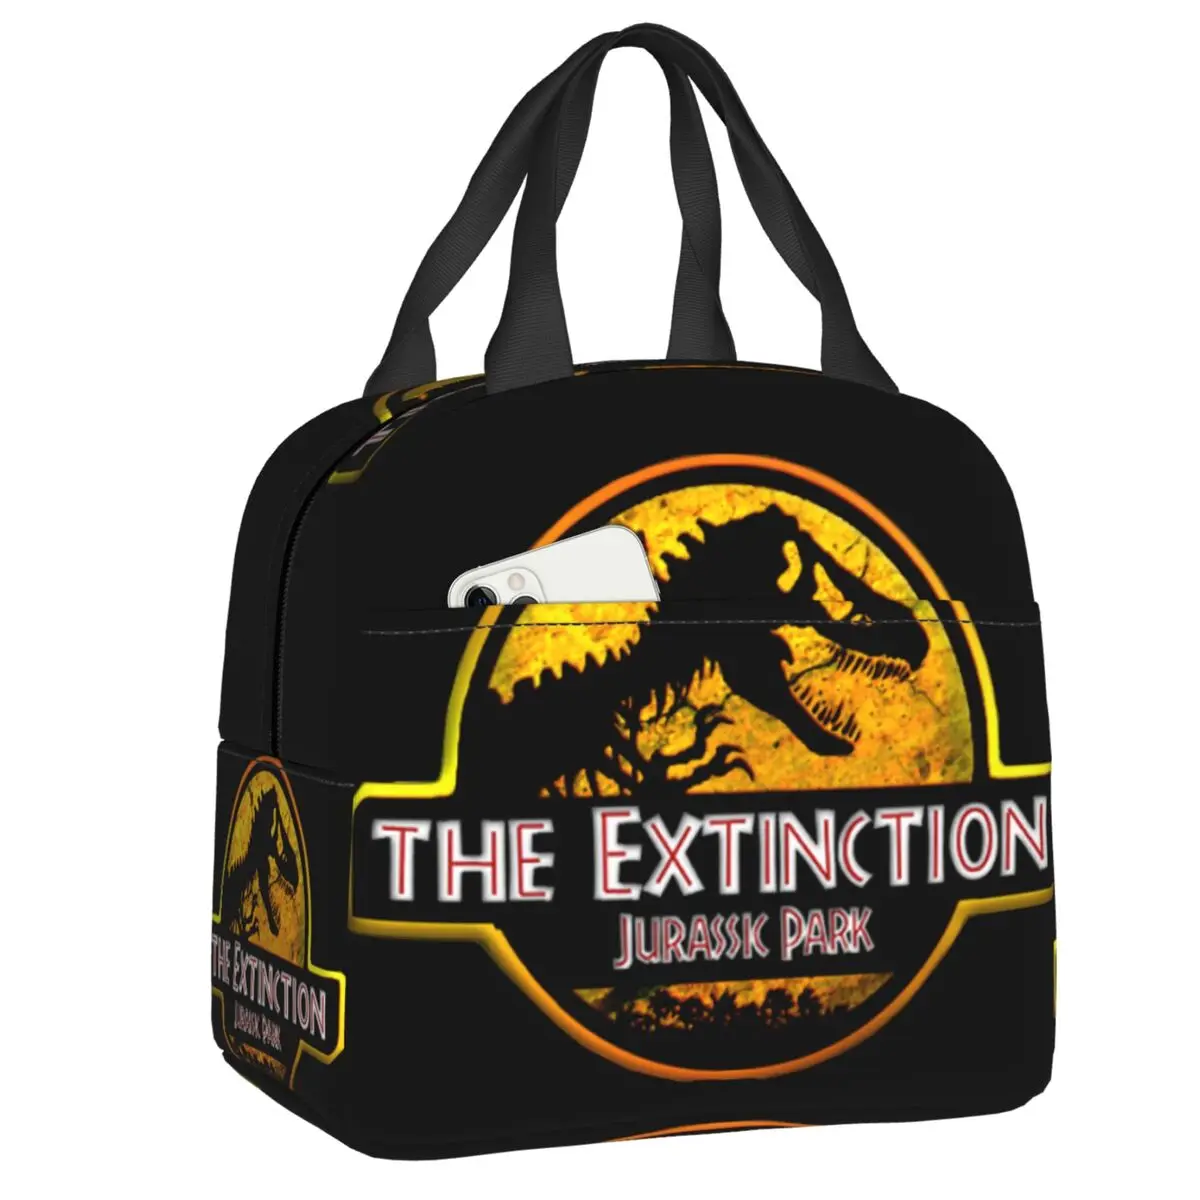 

Dinosaur World Jurassic Park Insulated Lunch Bags for Women Resuable Cooler Thermal Food Lunch Box Outdoor Camping Travel